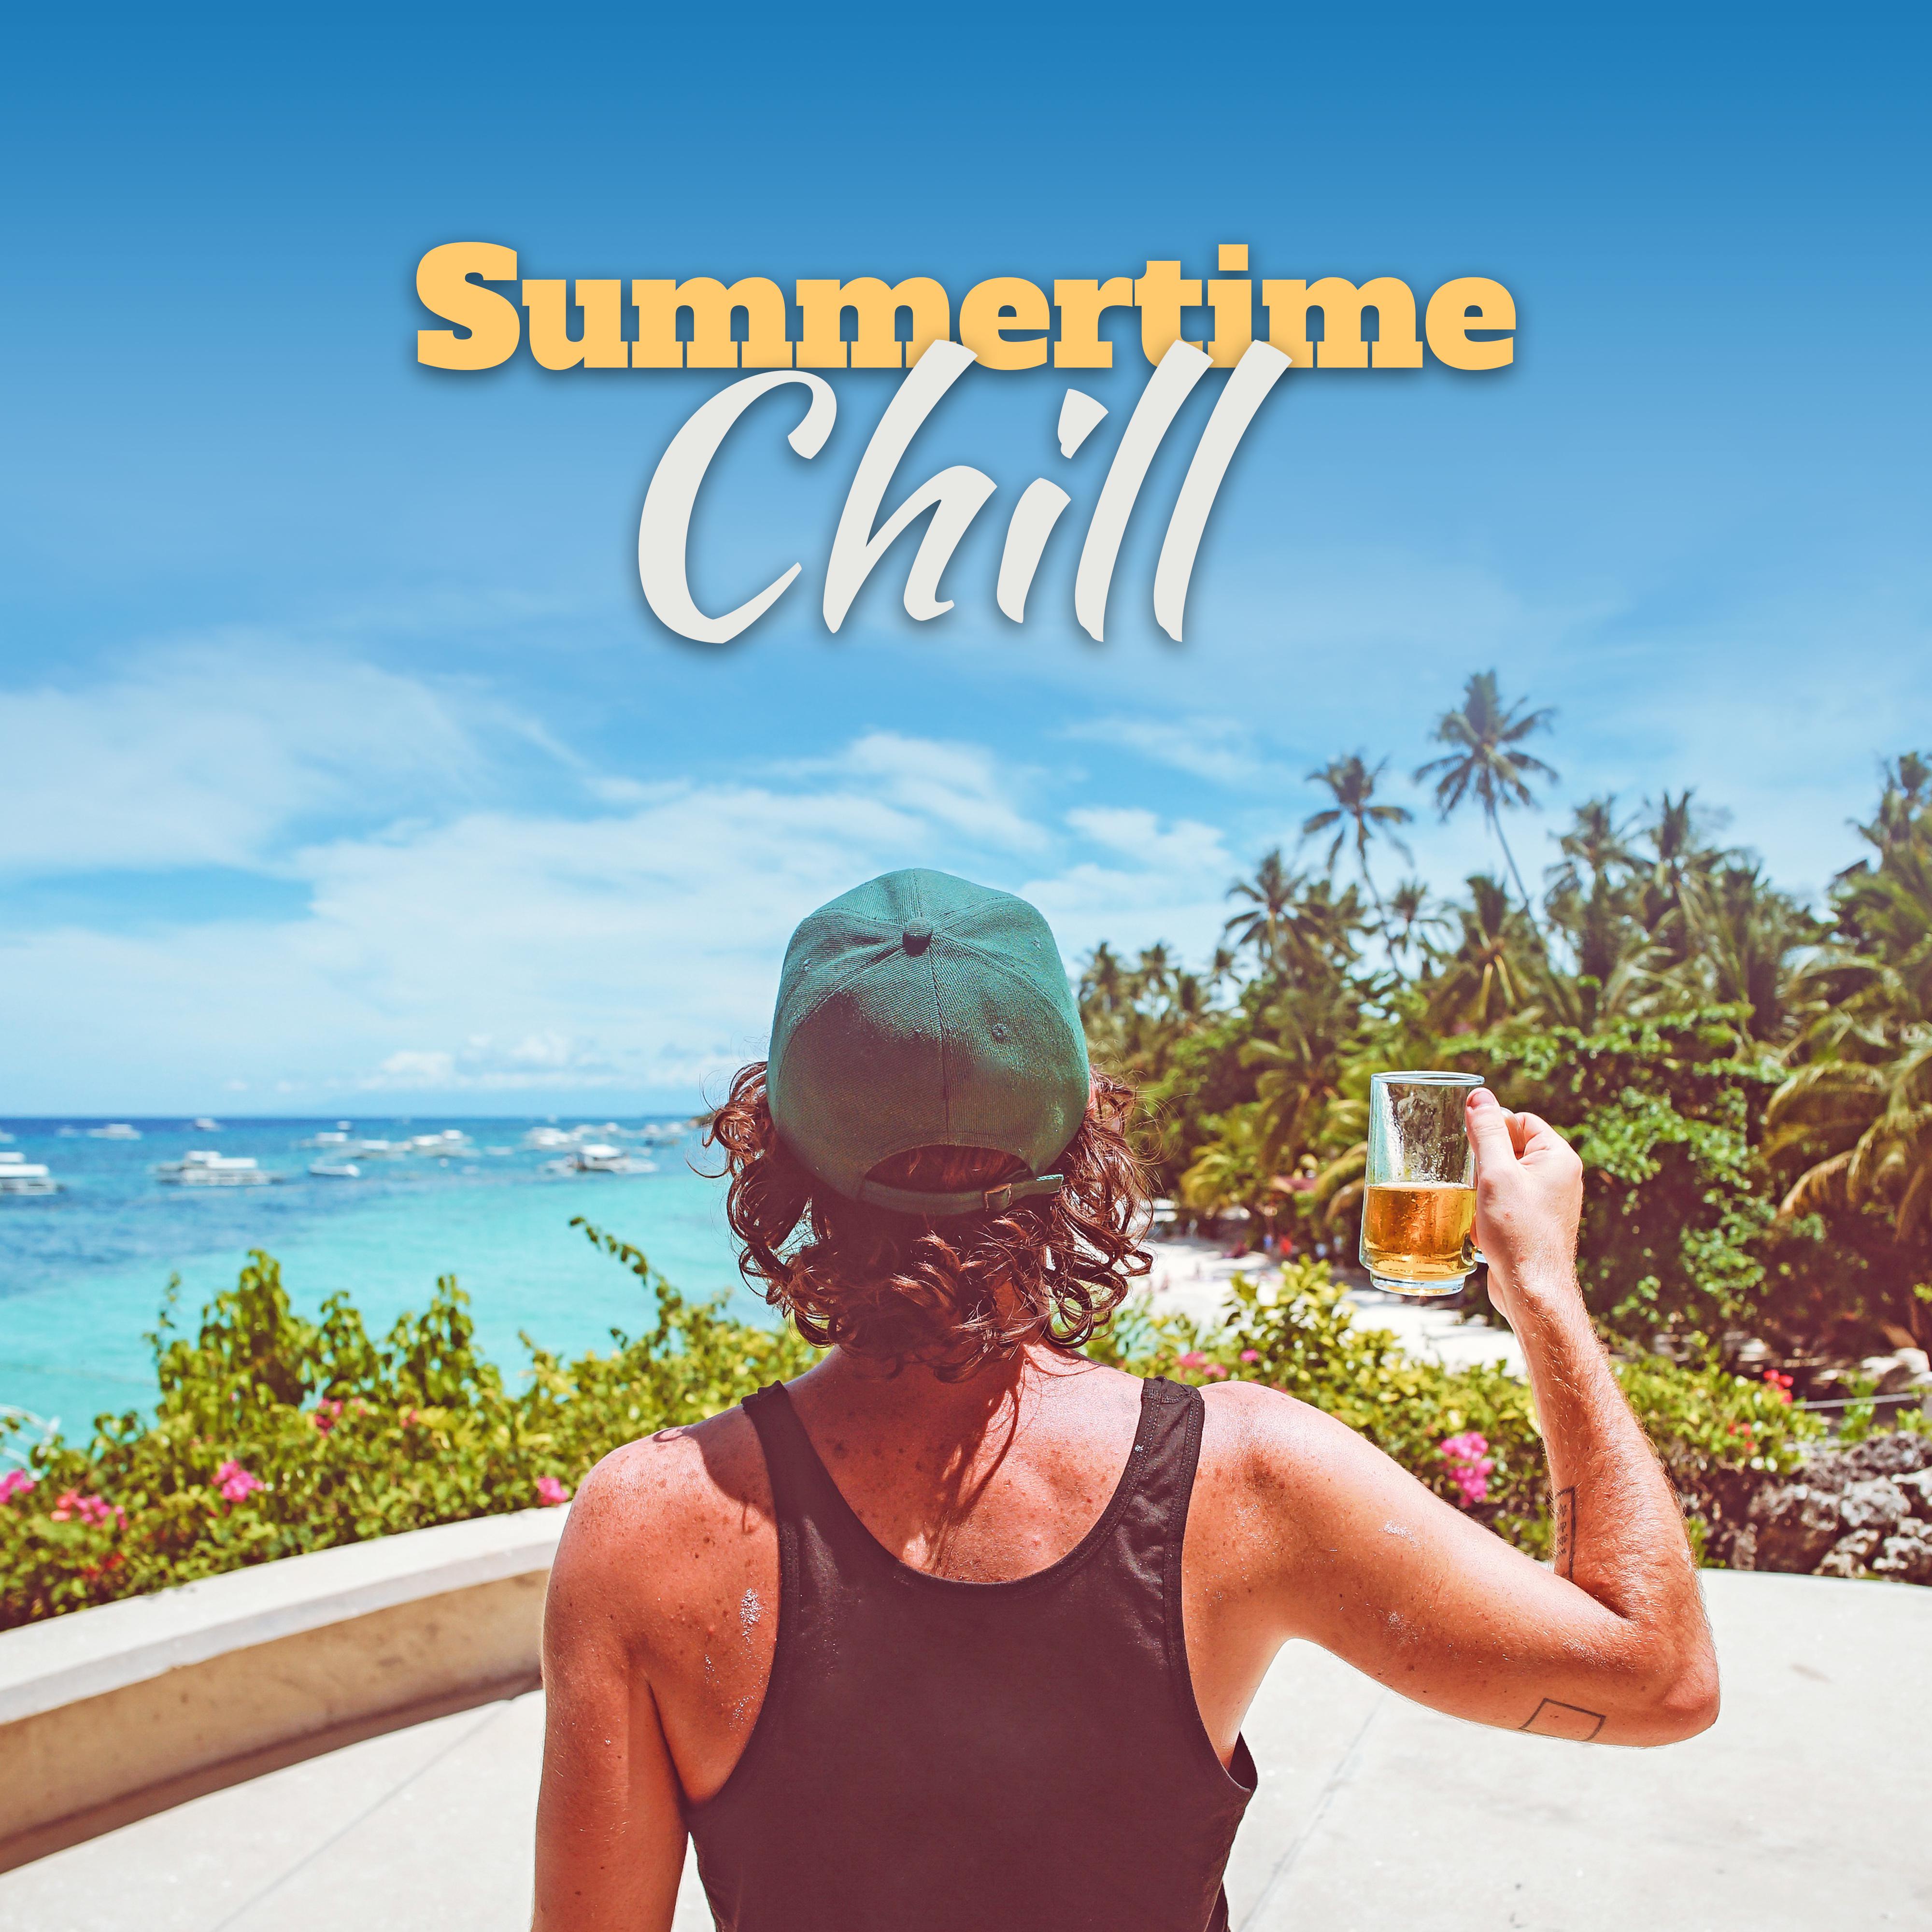 Summertime Chill – Relaxing Music Afterhours, Stress Relief, Beach Chill, Ambient Chill Out, Sunrise Feeling